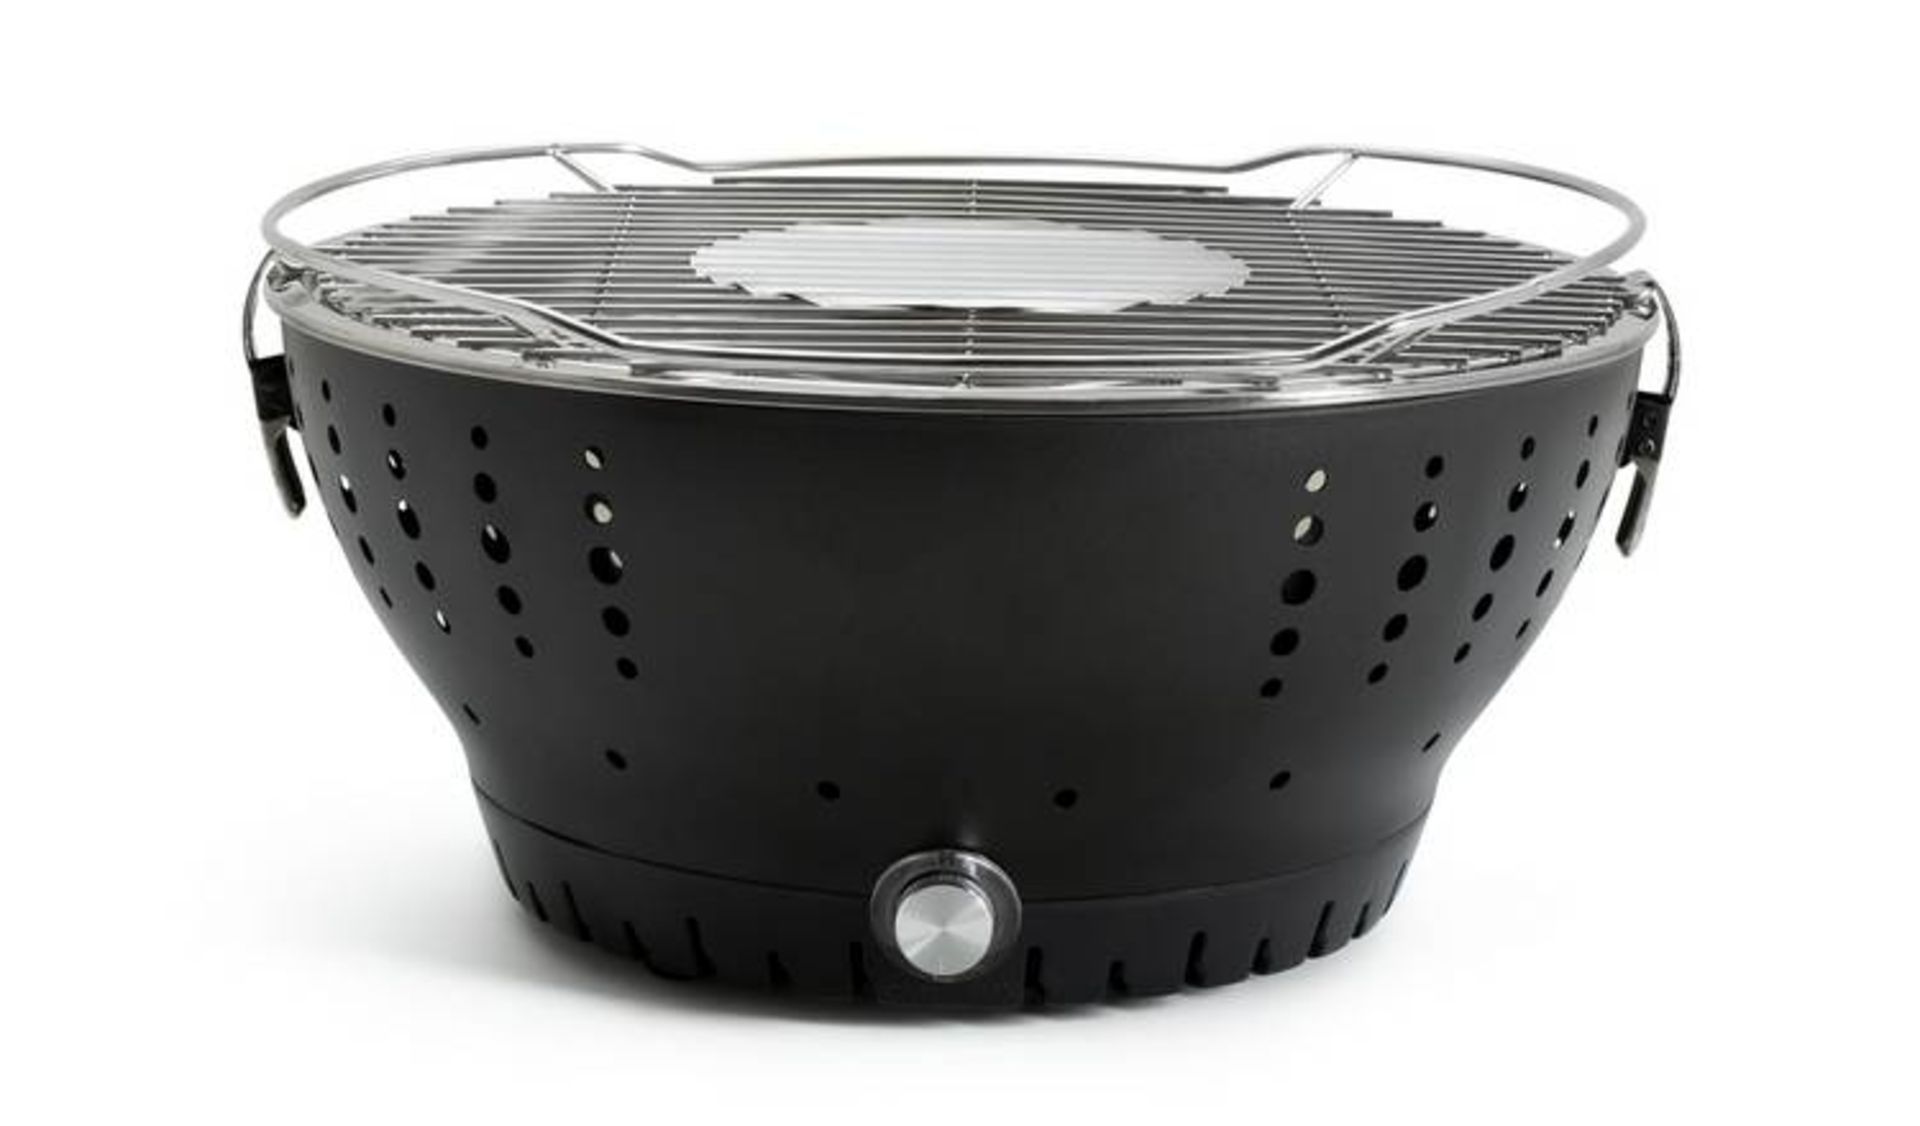 10 X BRAND NEW 38CM PREMIUM CHARCOAL BBQ WITH BUILT IN FANS RRP £89 EACH